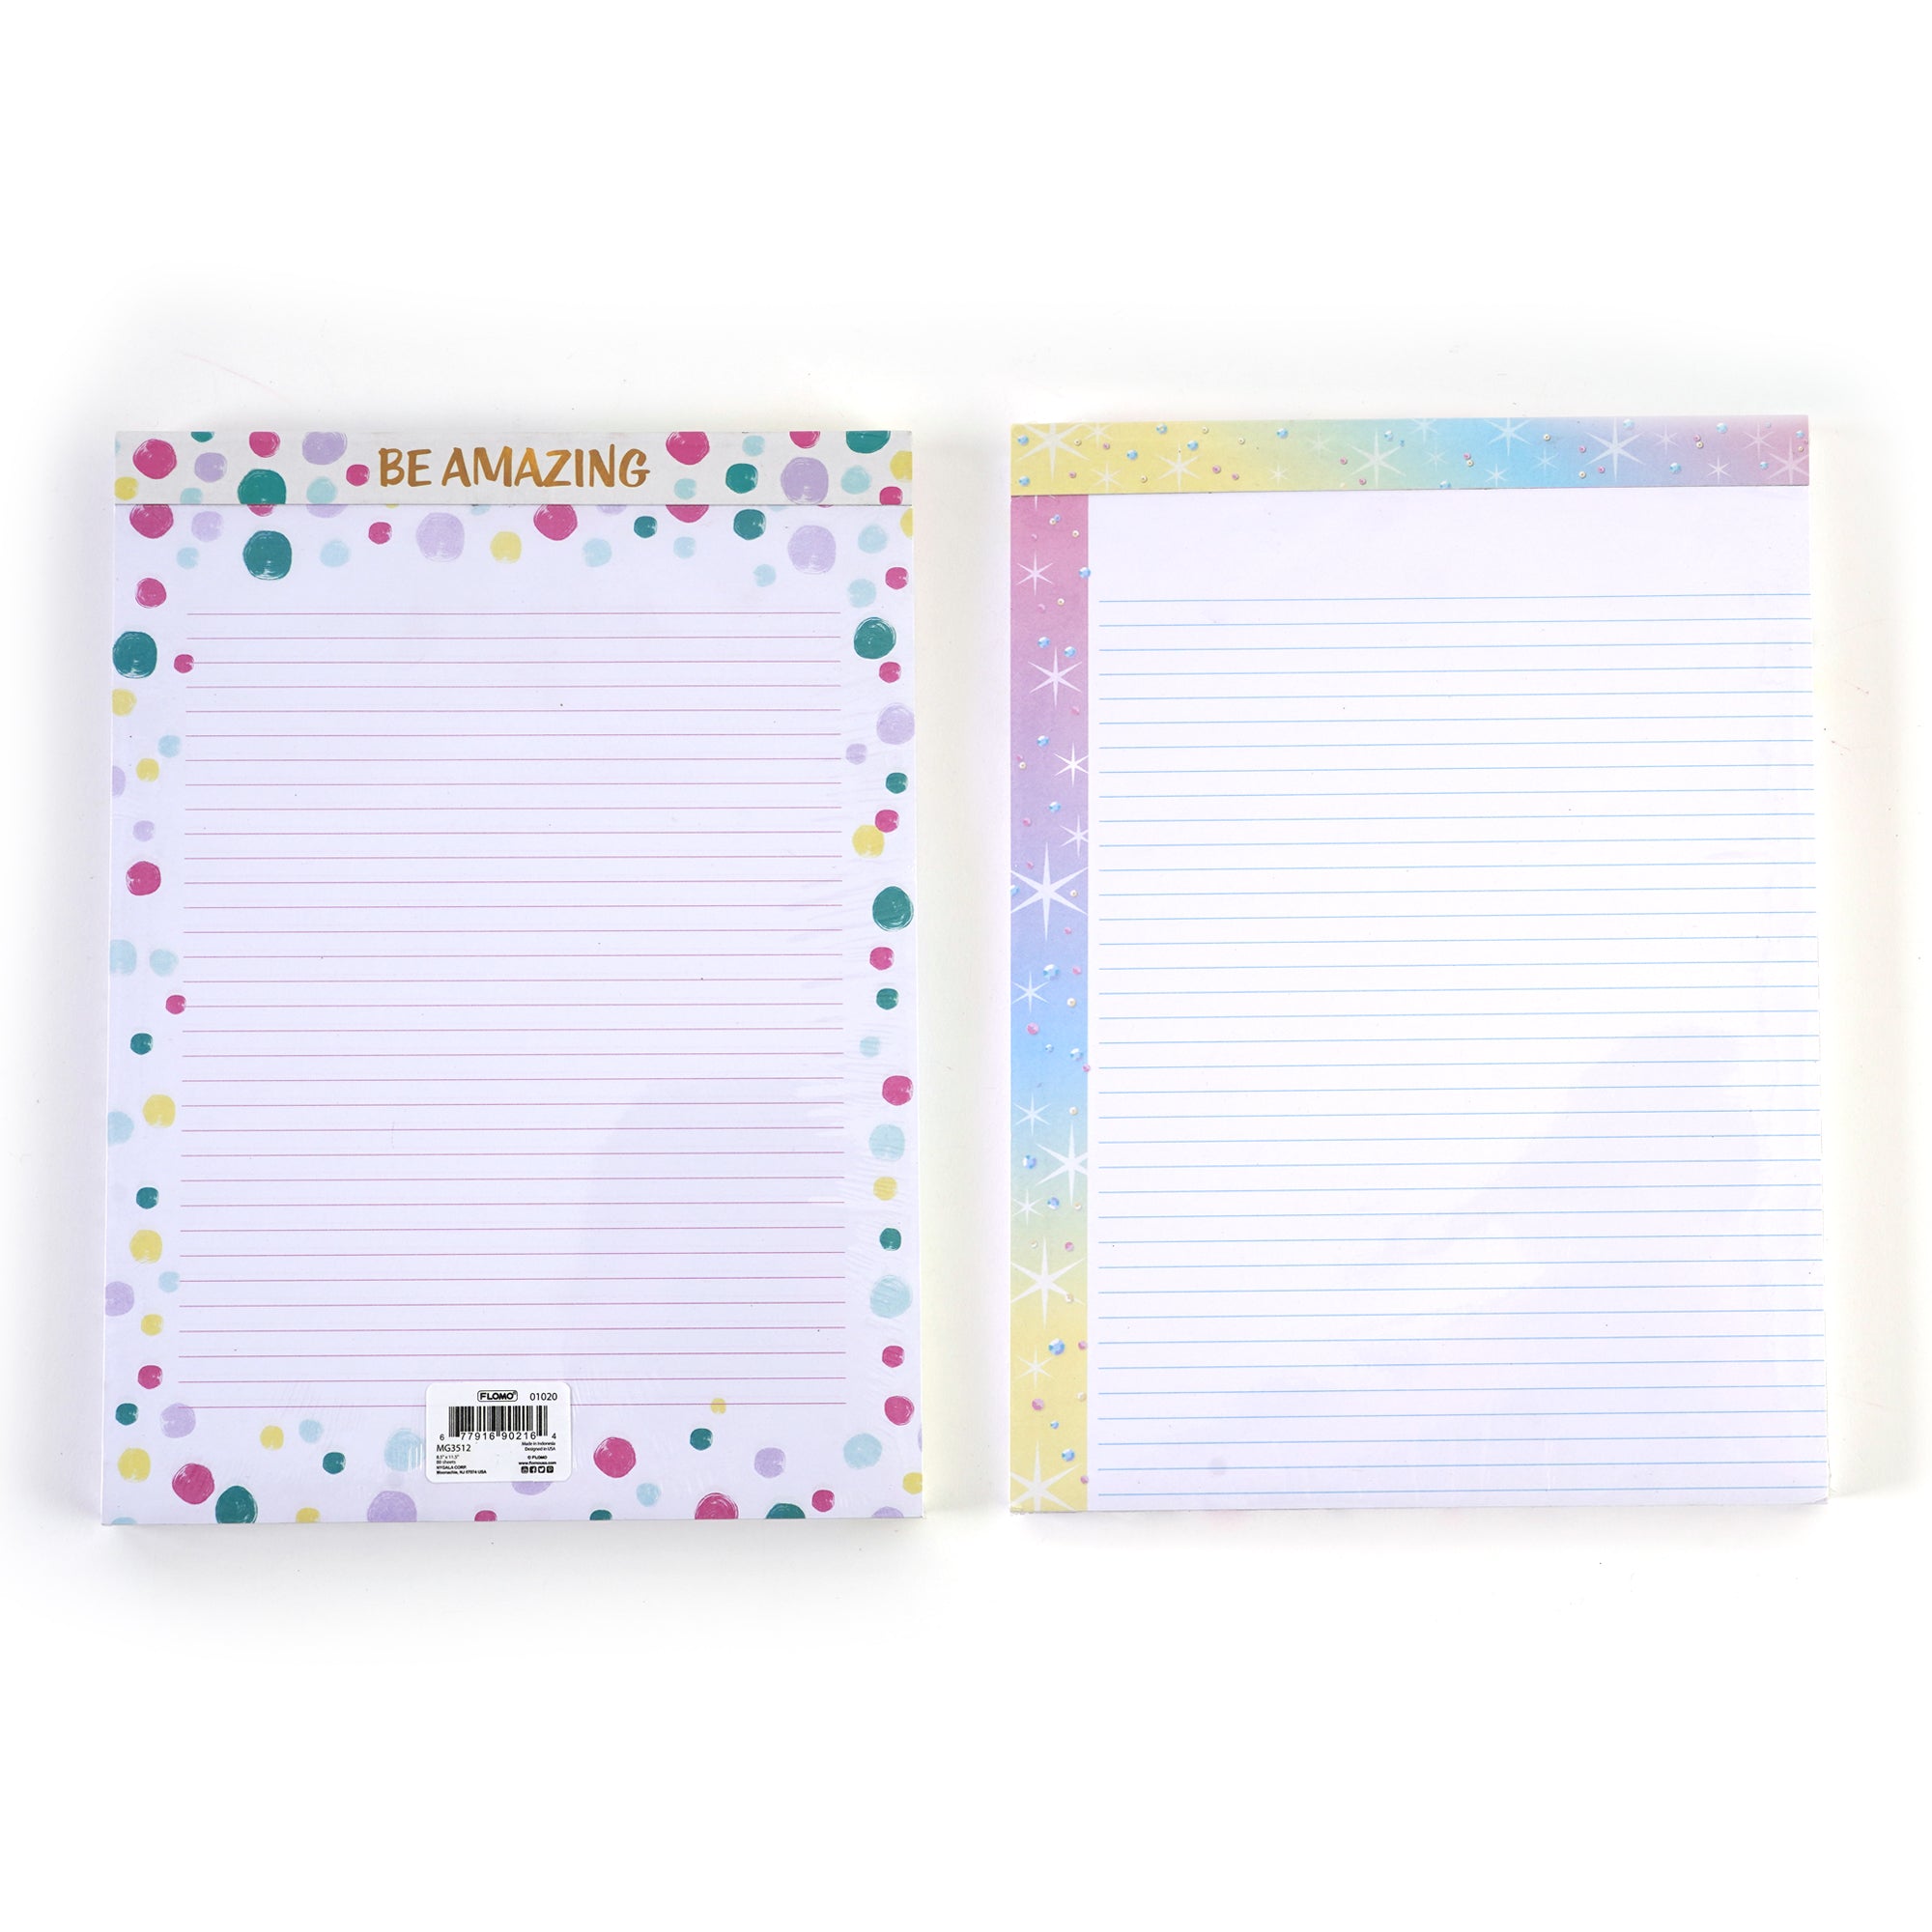 Rainbow Stationery Paper - 80 Sheets